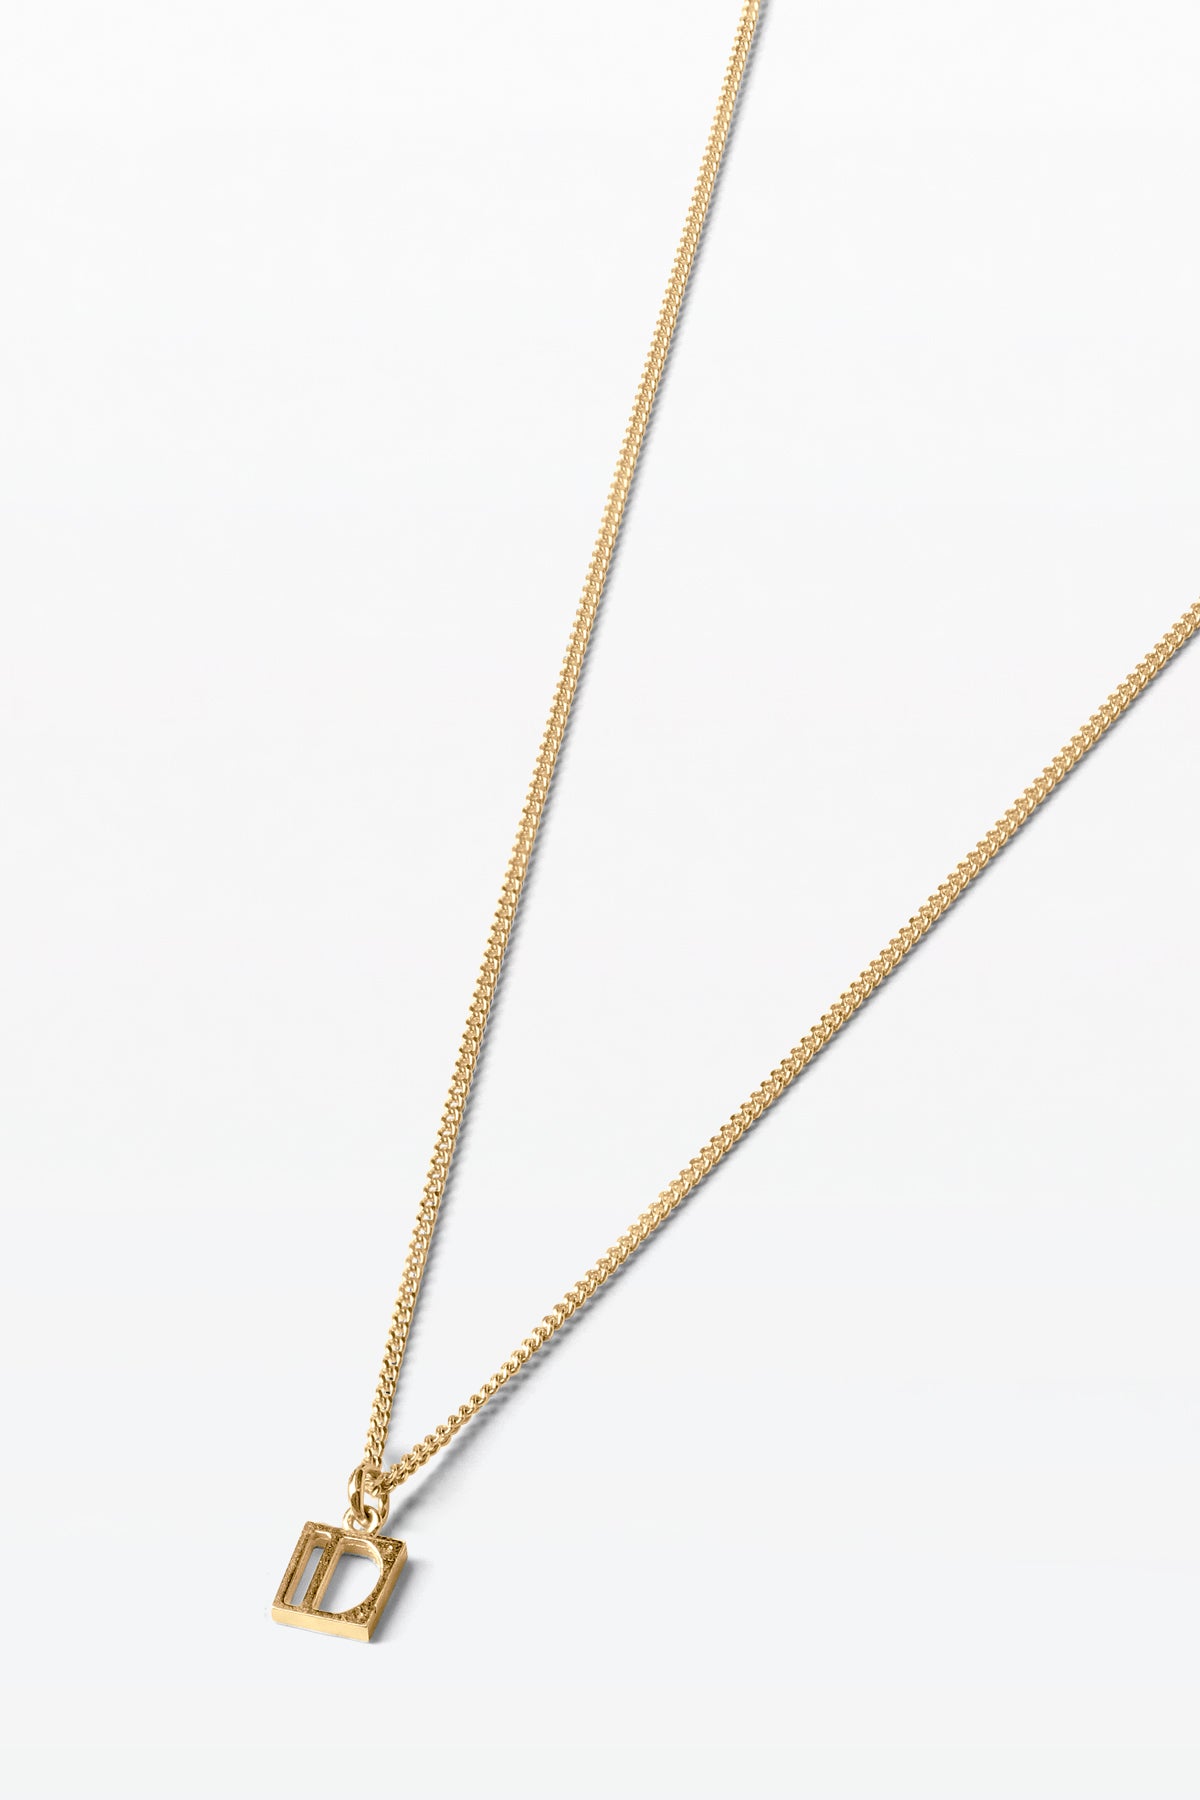 Arven Necklace 01 18K Yellow Gold - 45cm